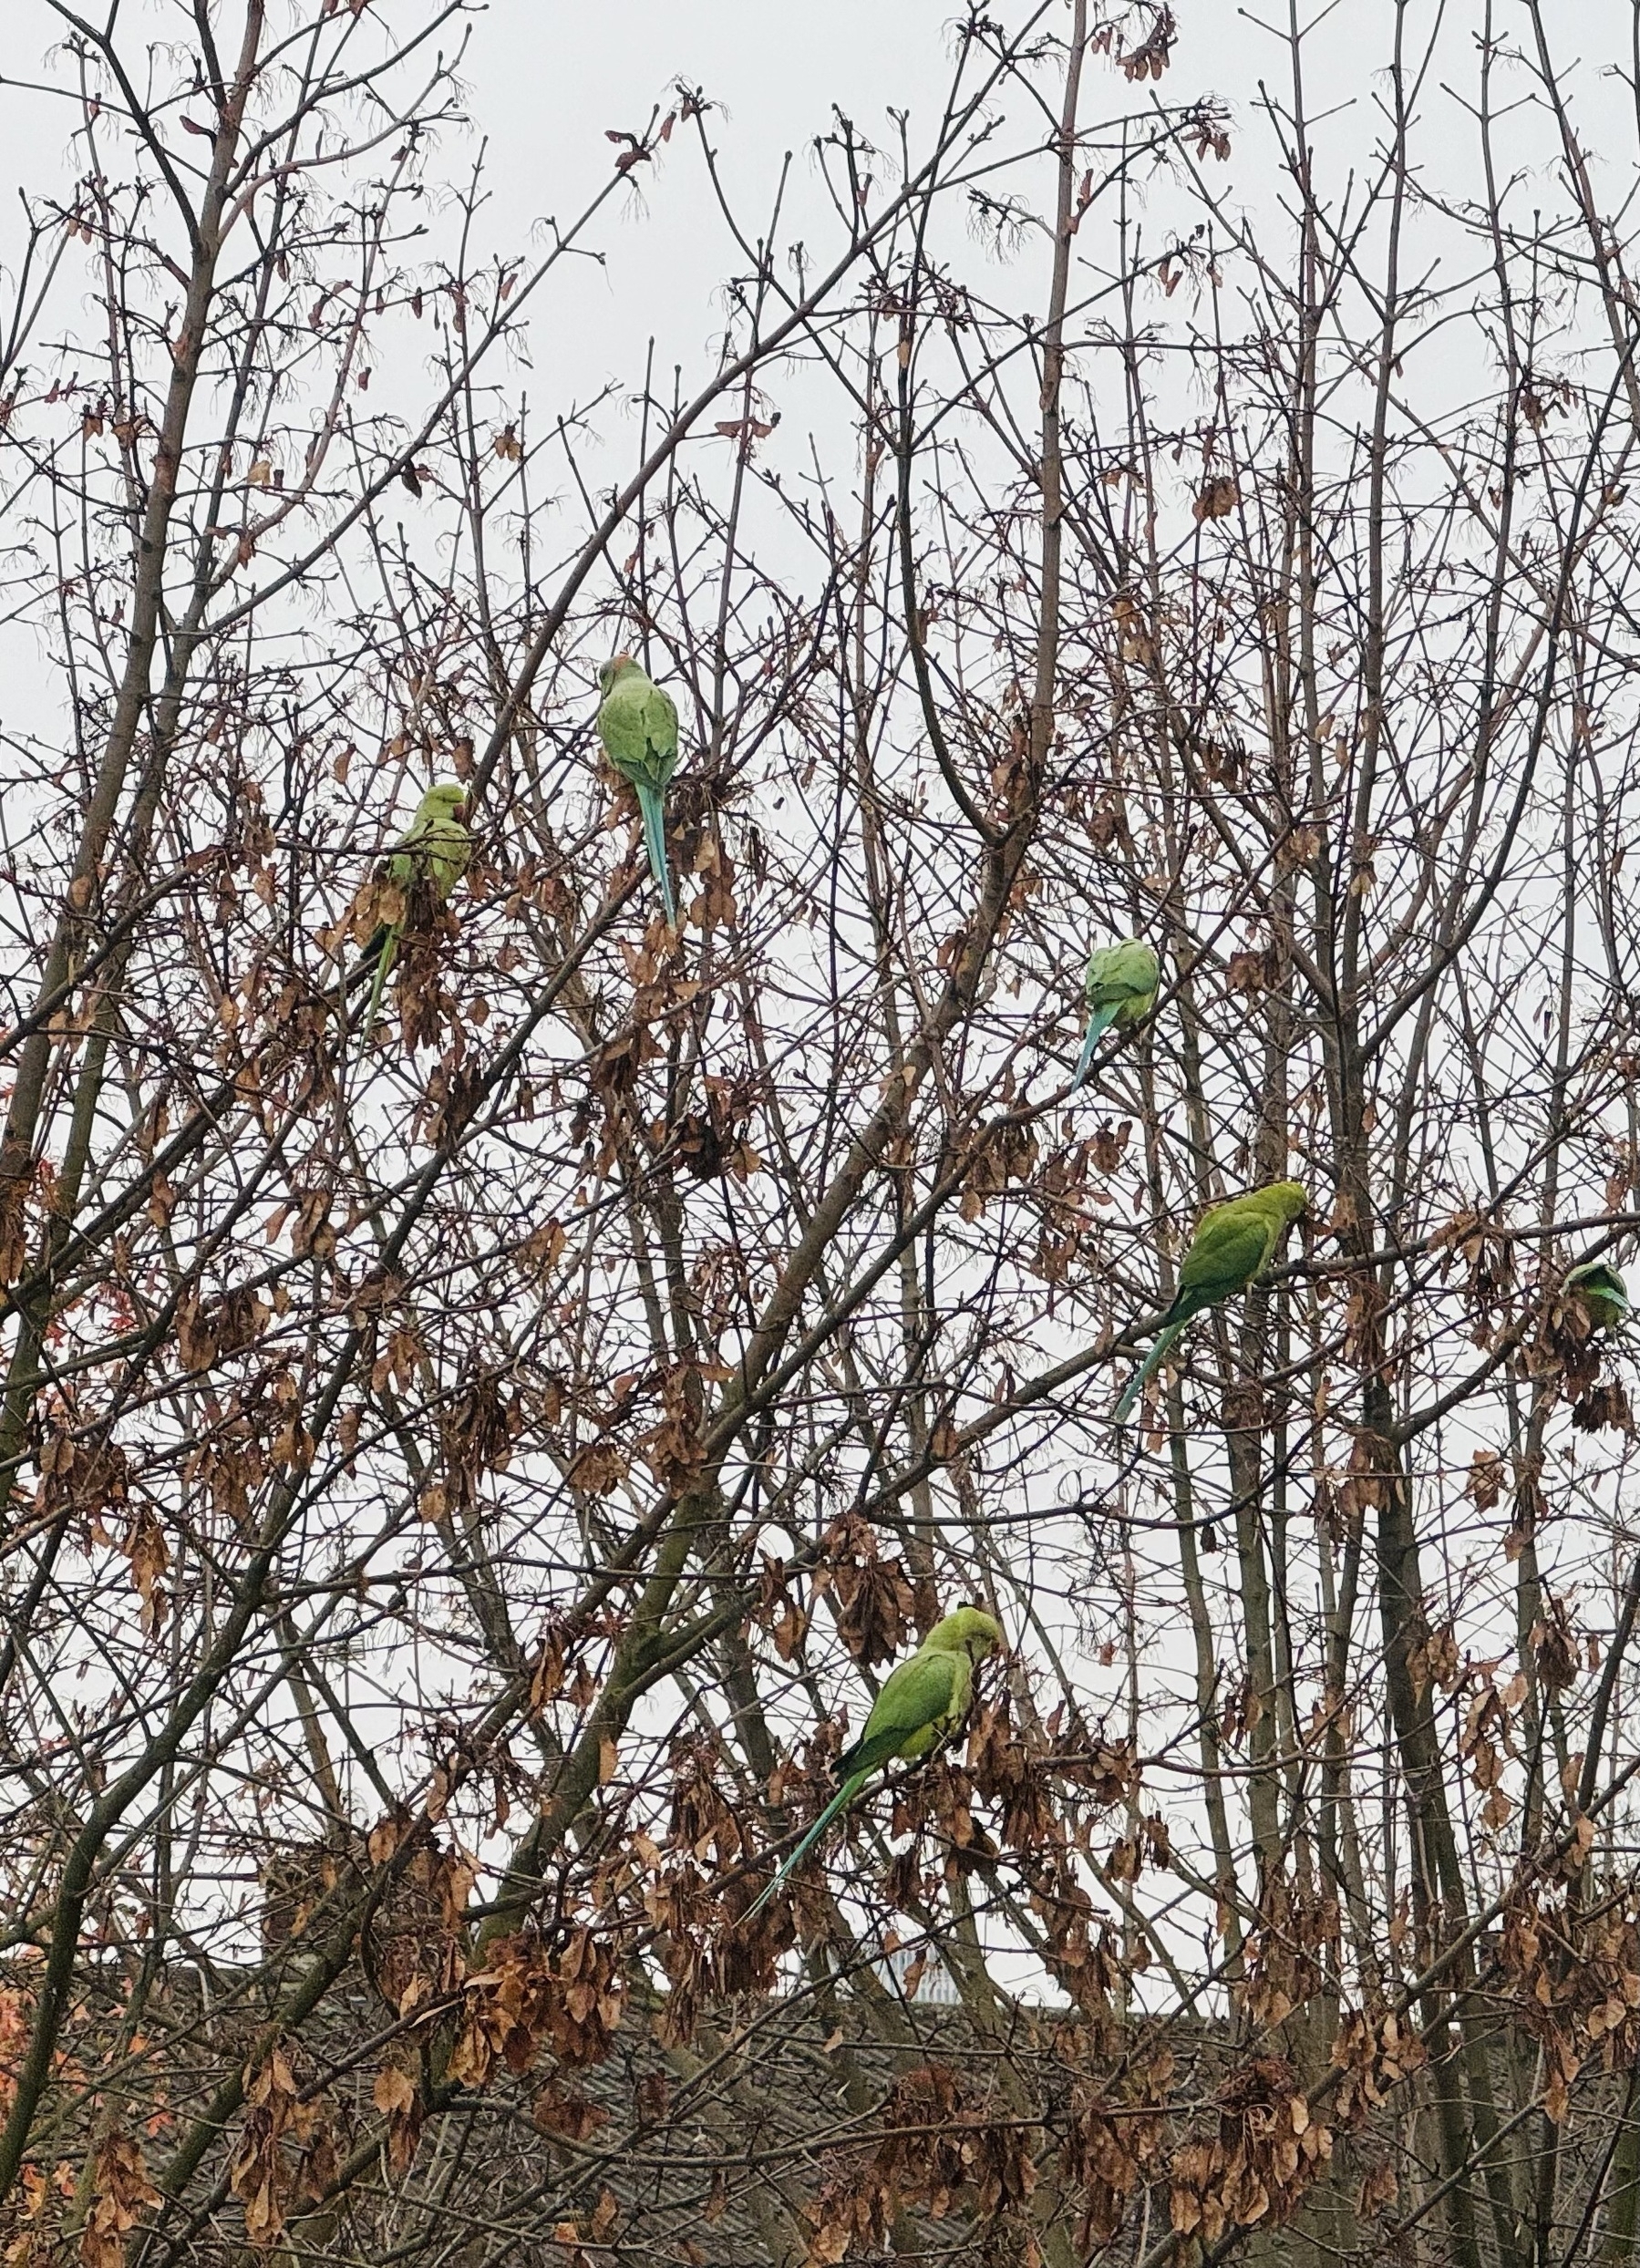 Some parakeets in a bare tree.